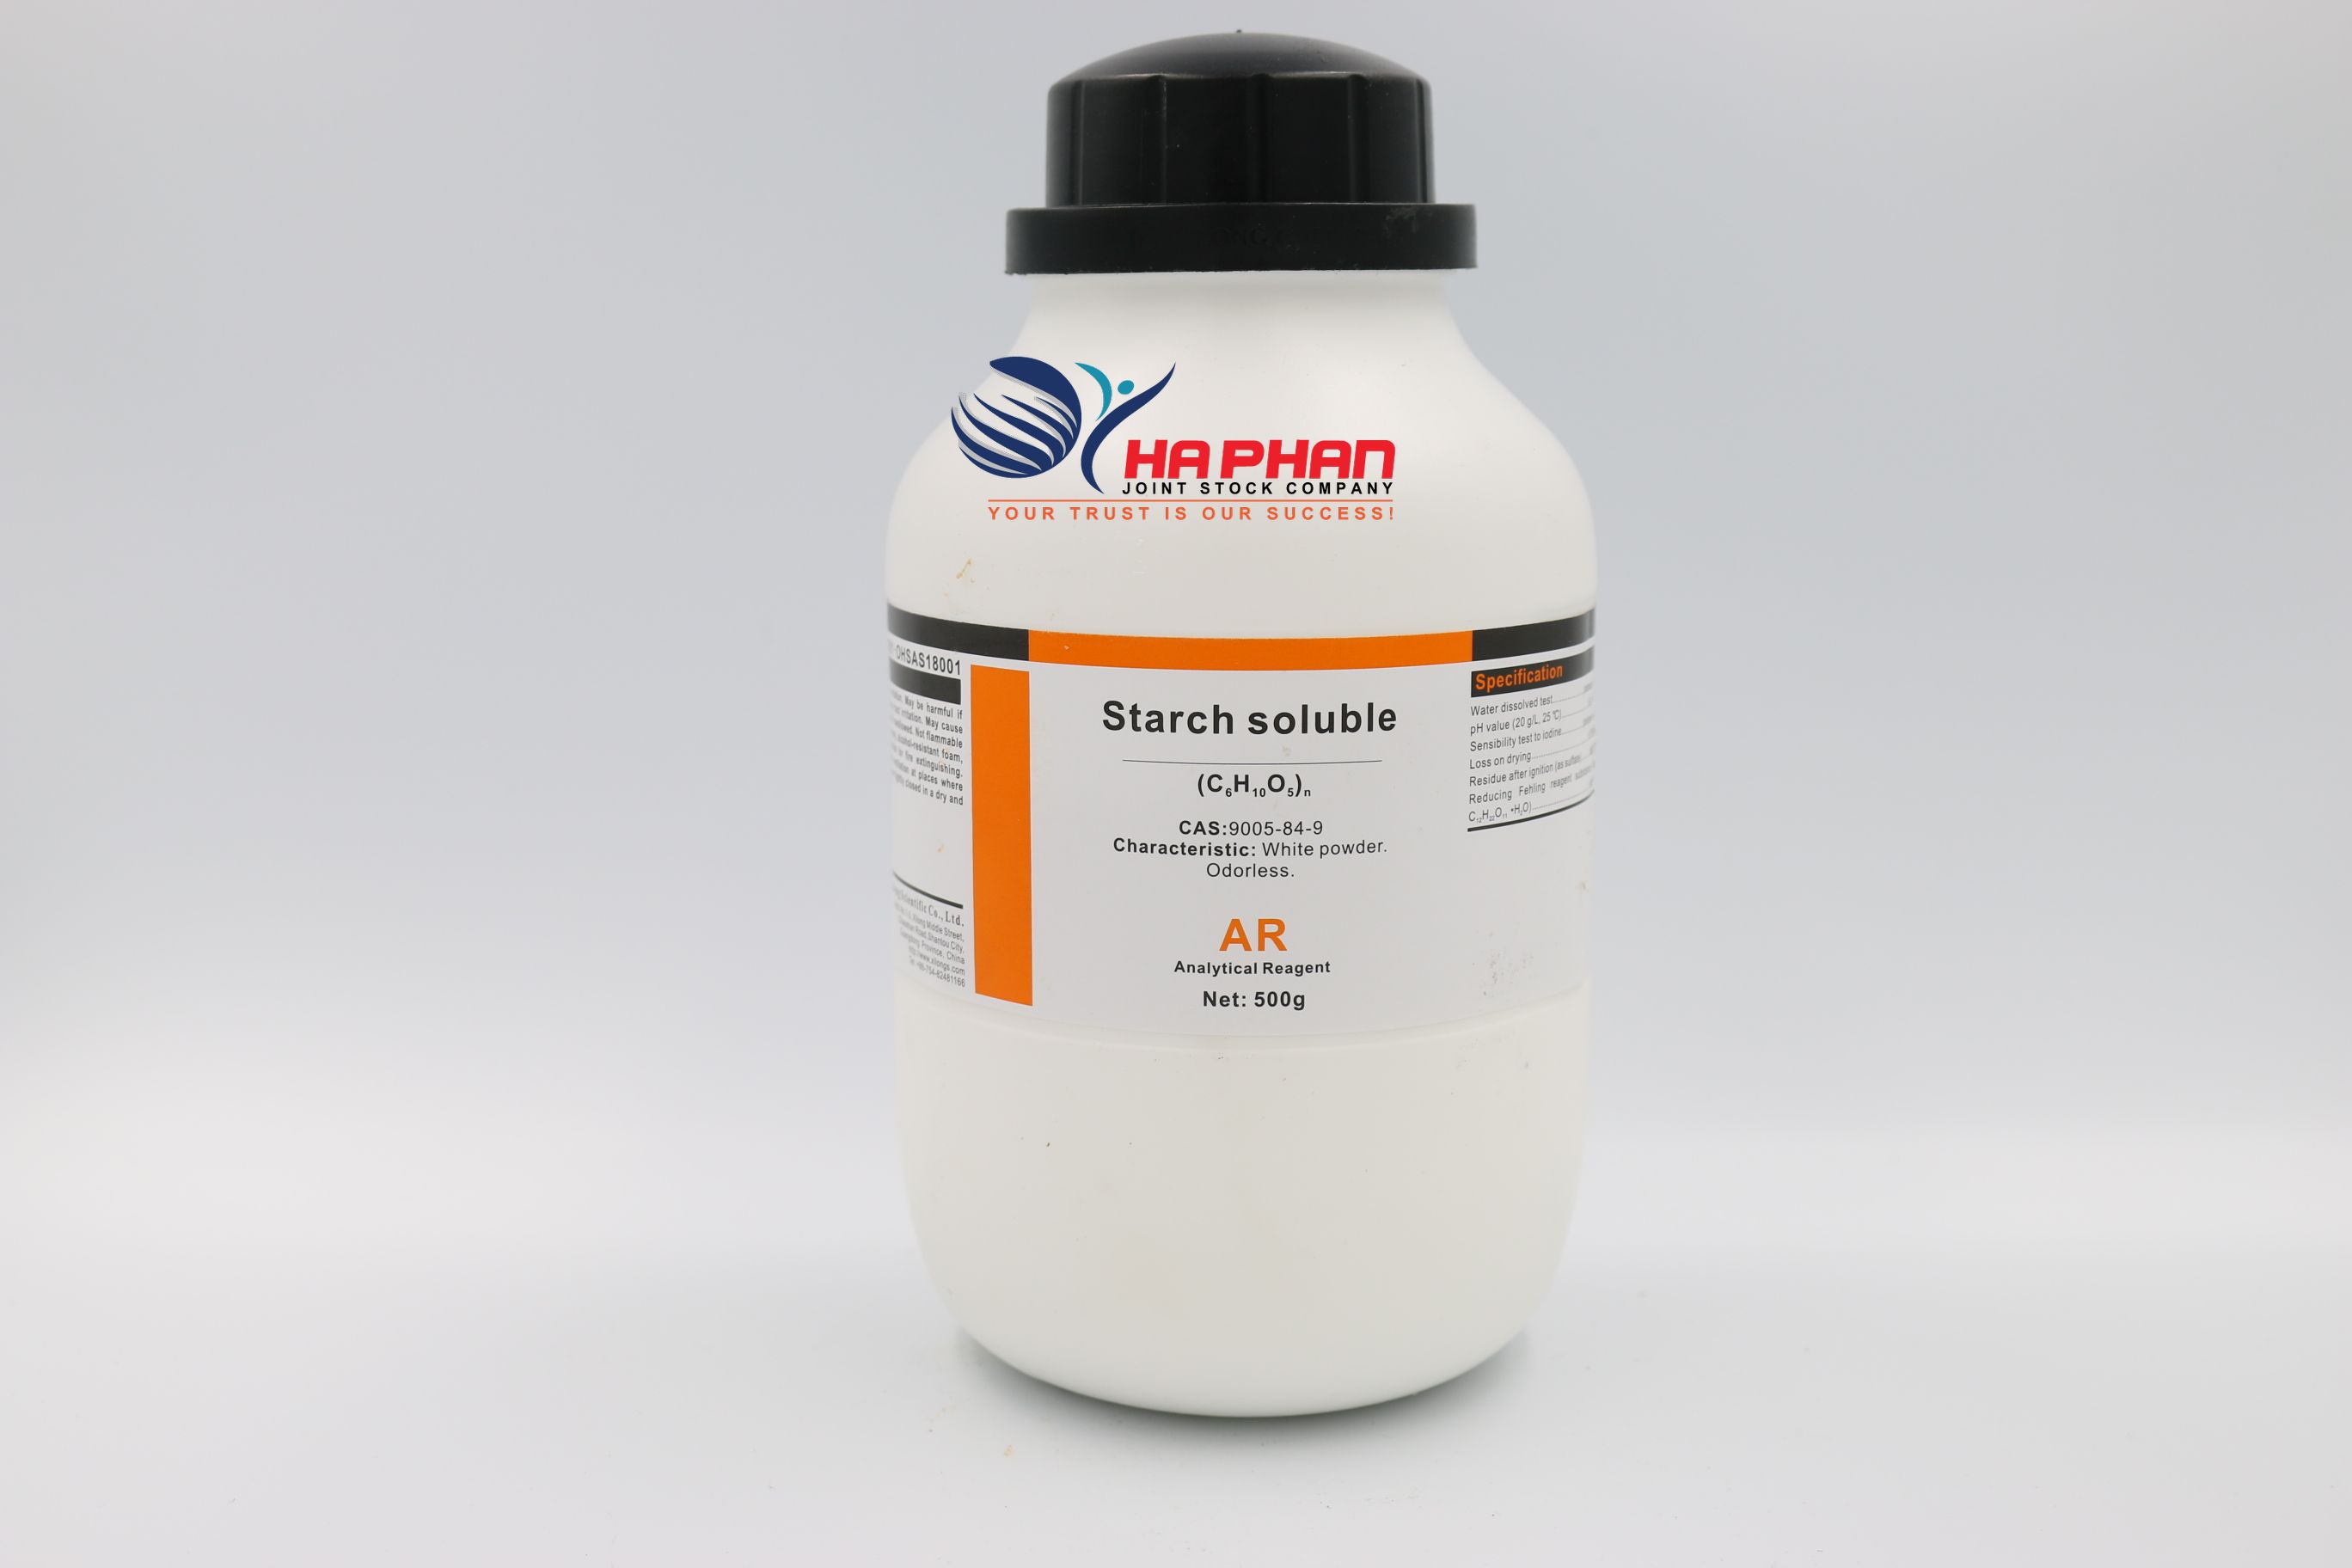 Starch Soluble